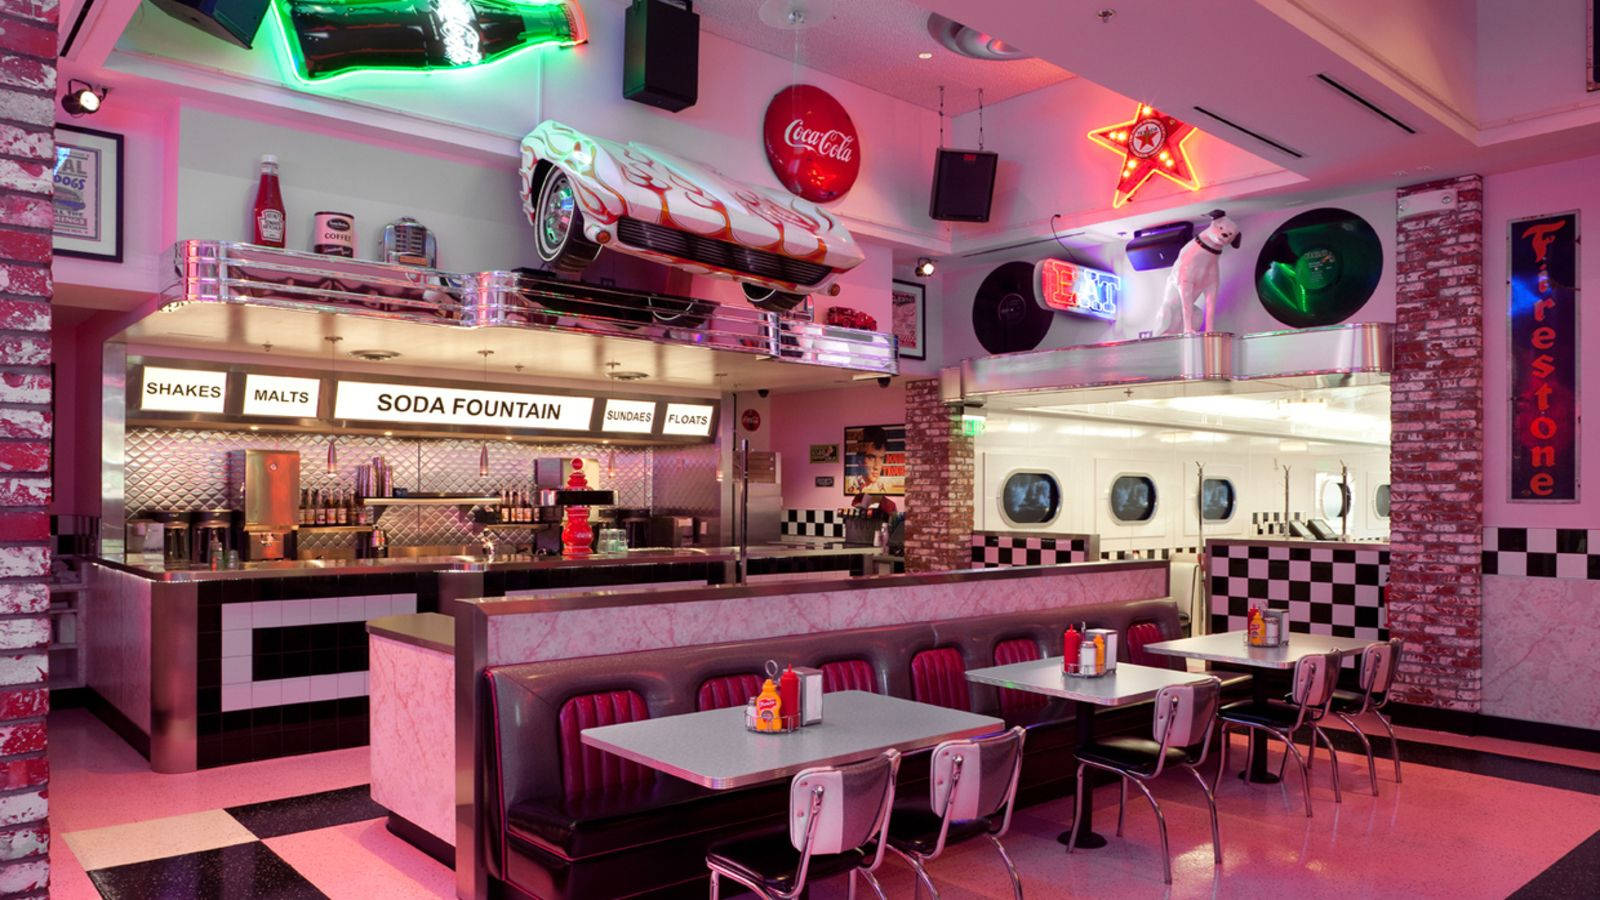 Captivating Pink 50s Diner Interior View Background